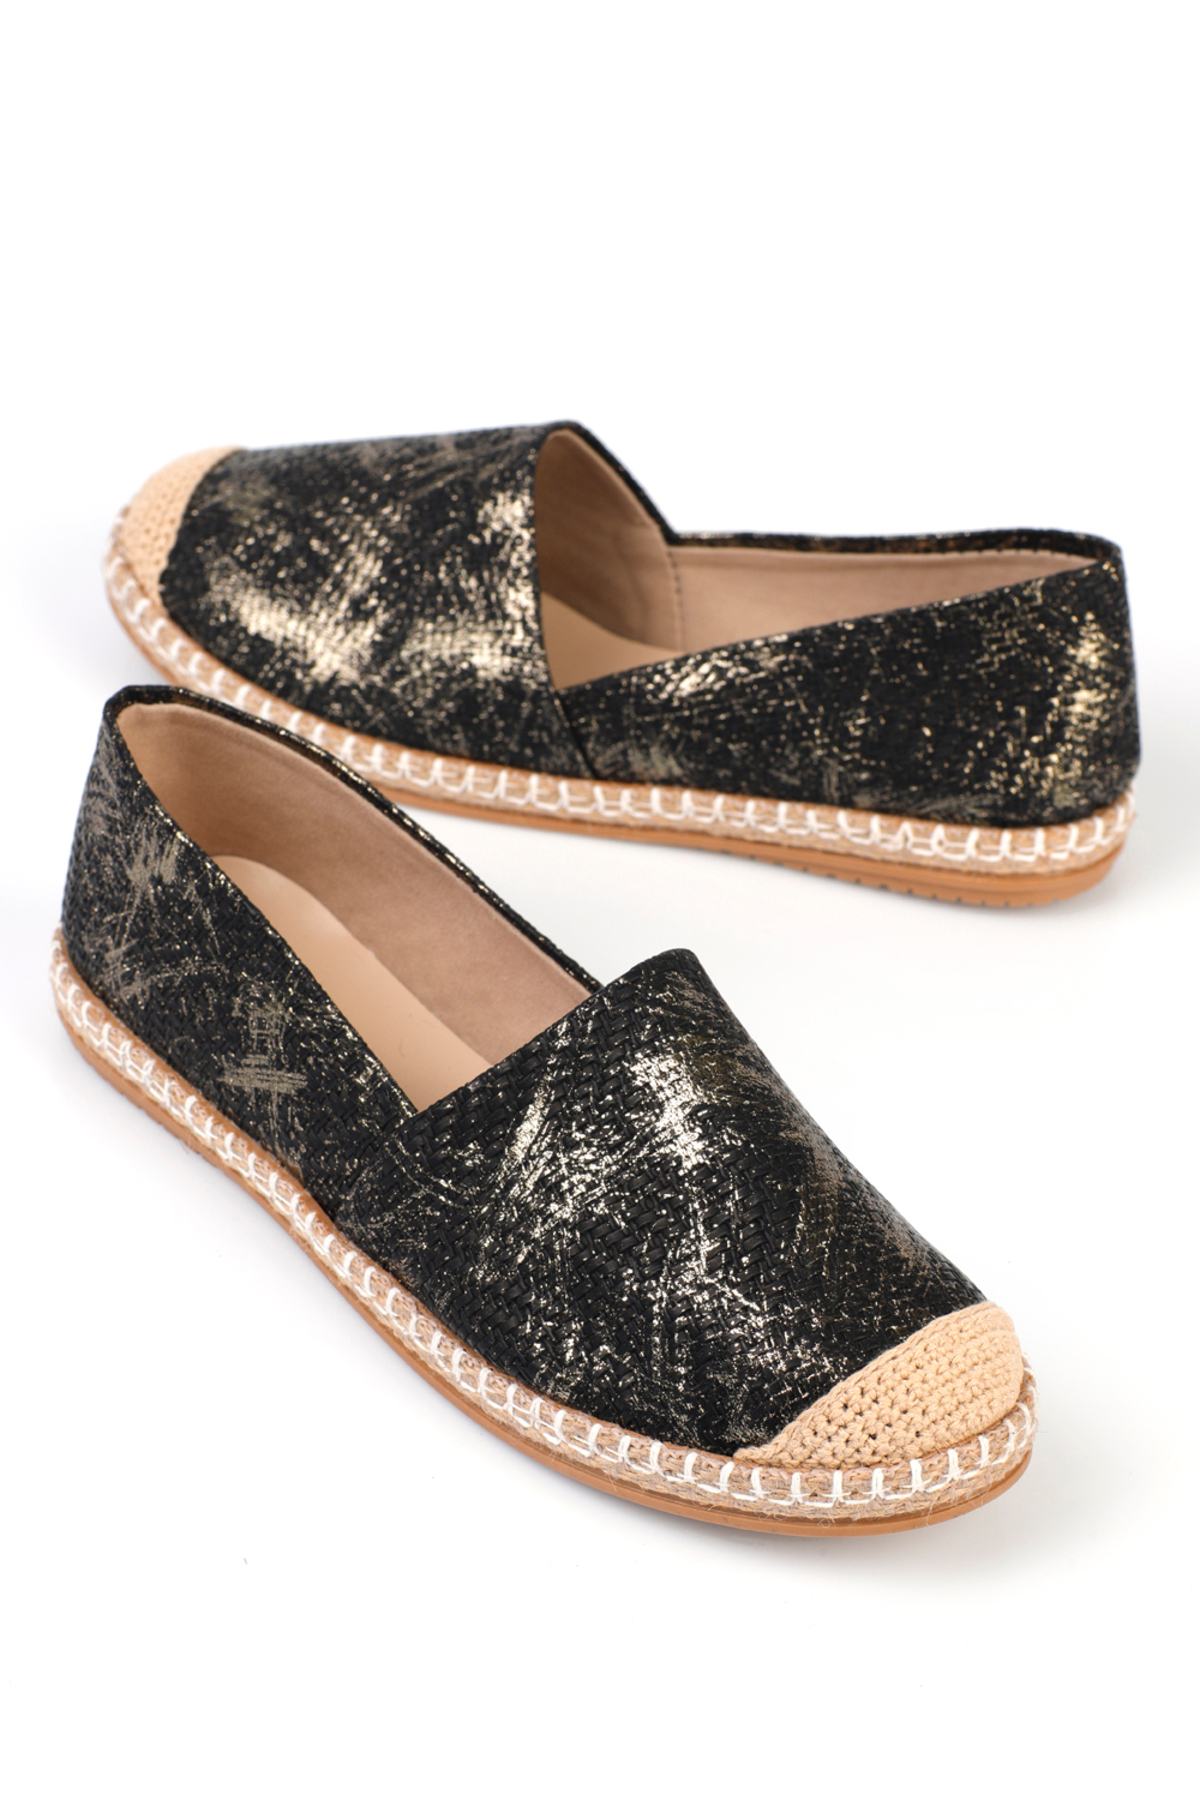 Capone Outfitters Pasarella Women's Espadrille